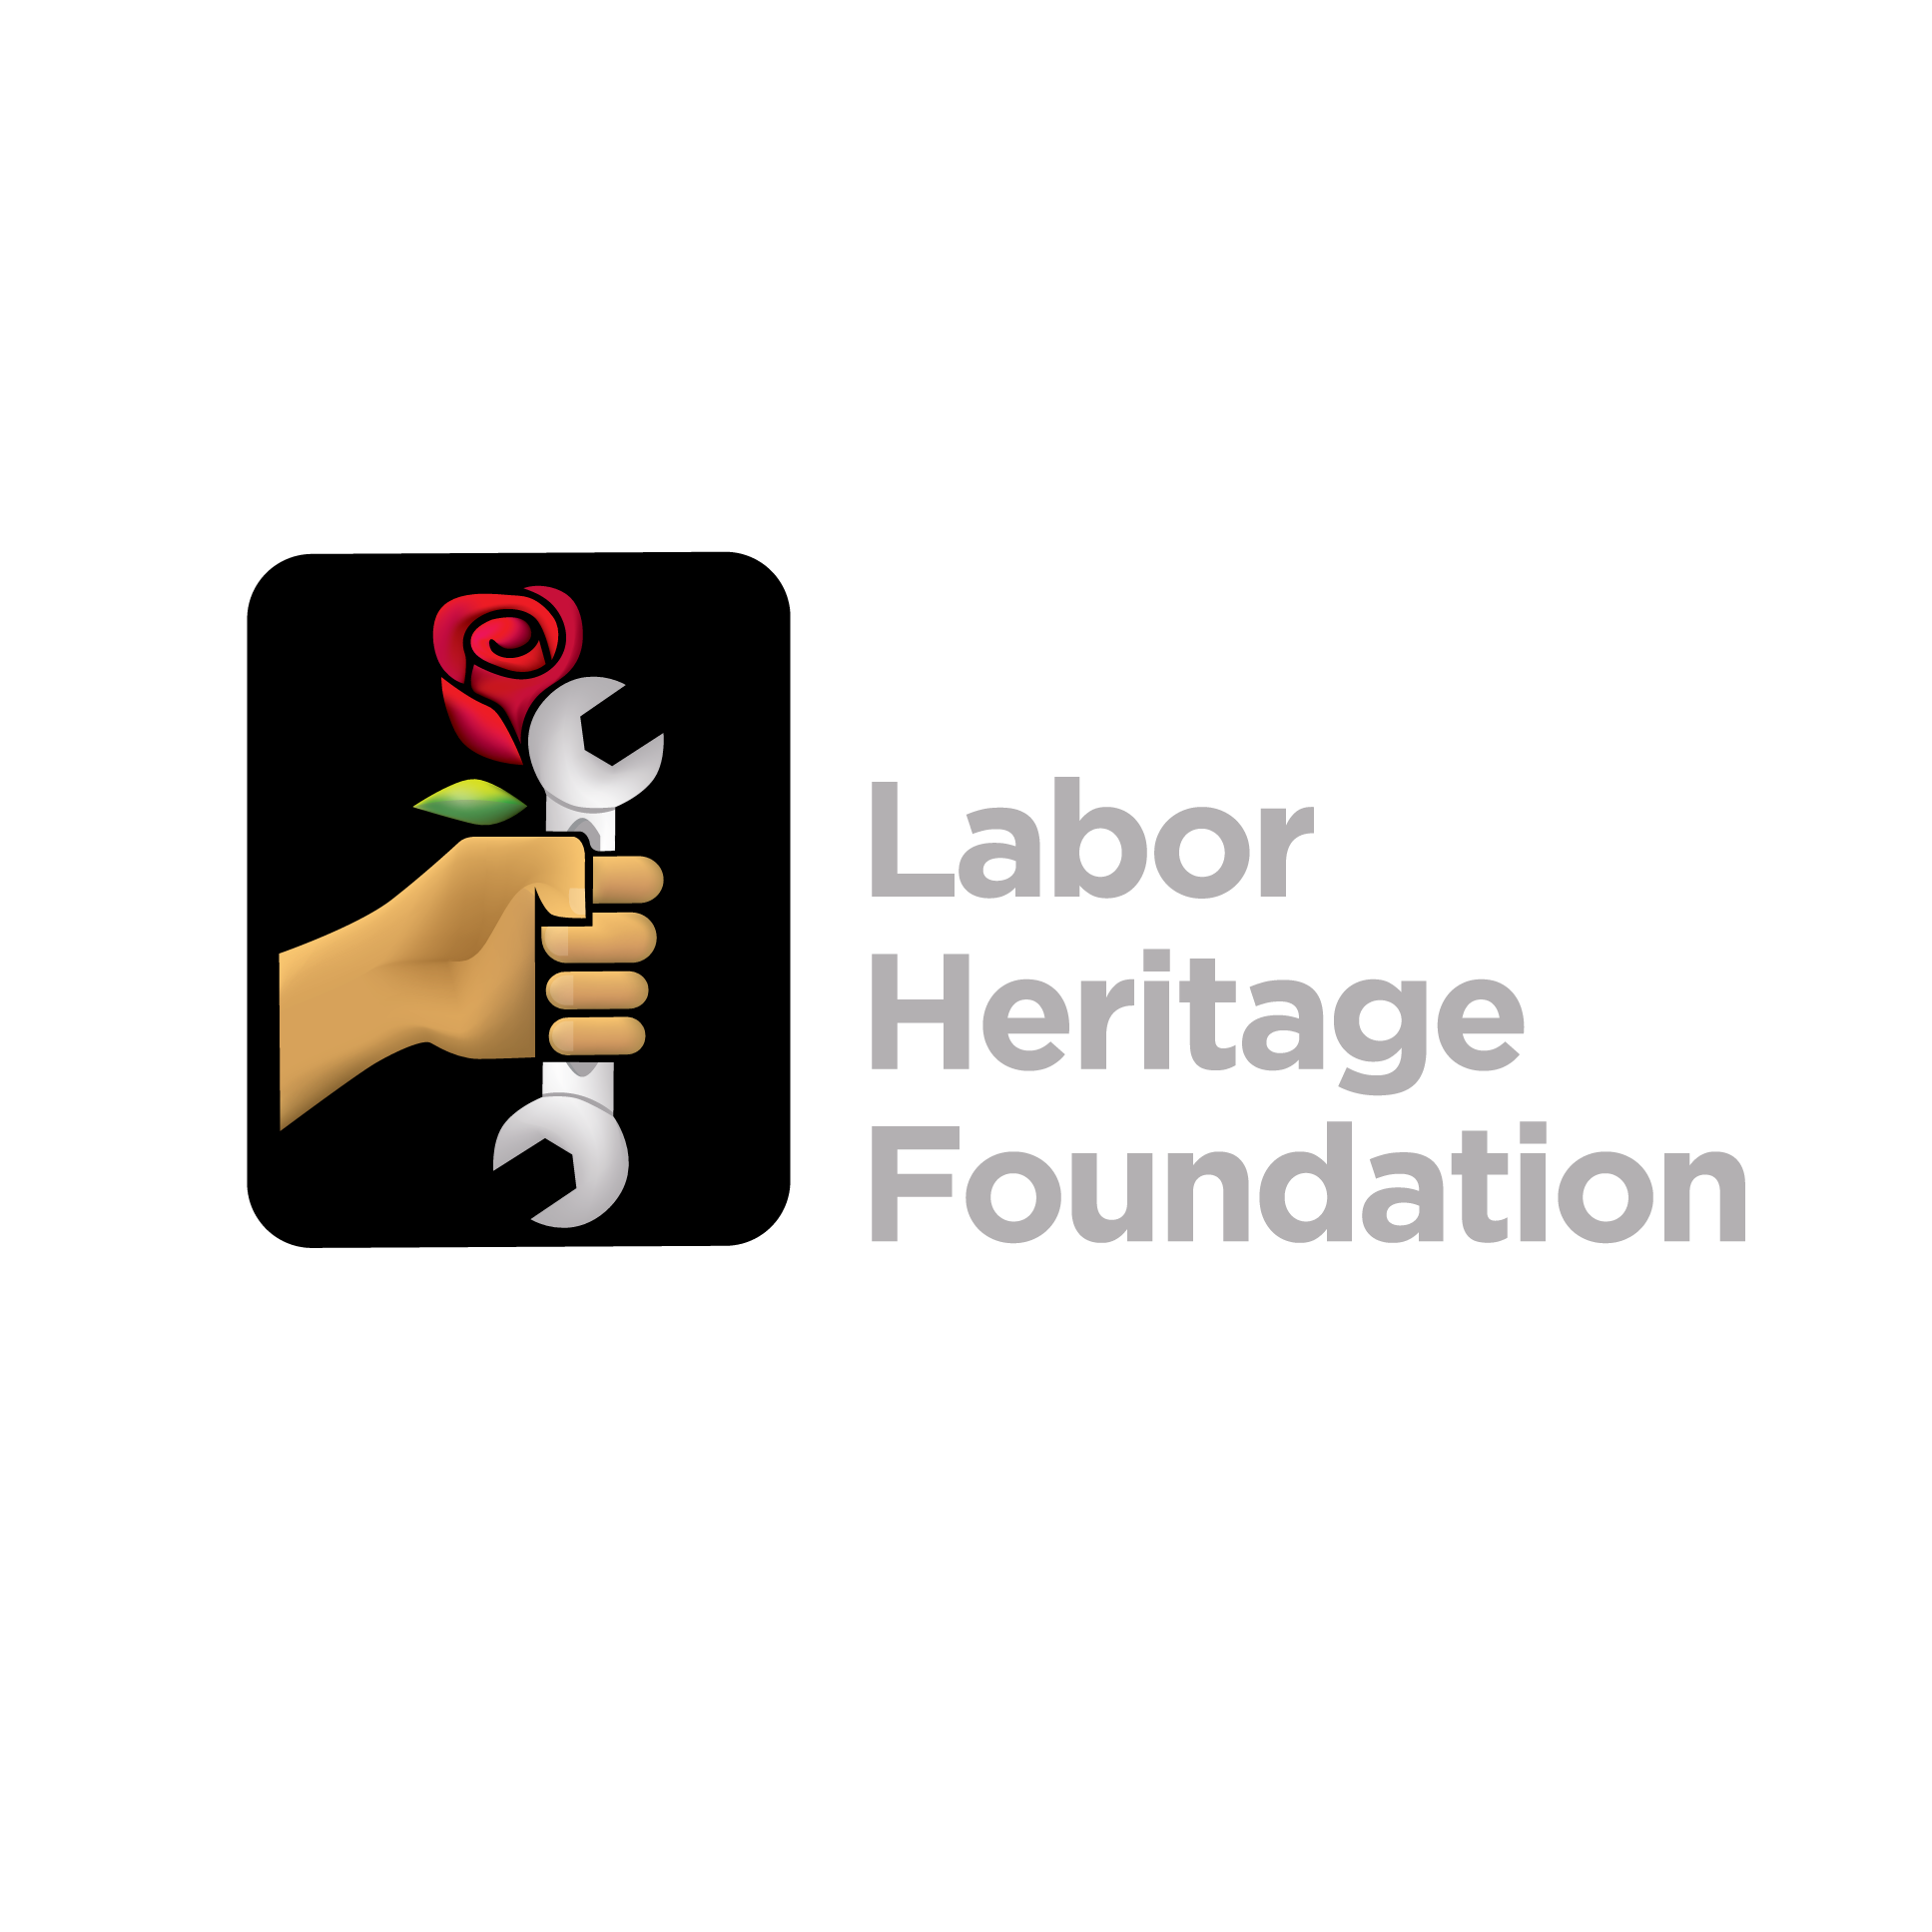 Working to strengthen the labor movement through the arts, including music, film, poetry, written works, theatre, and artistic works.